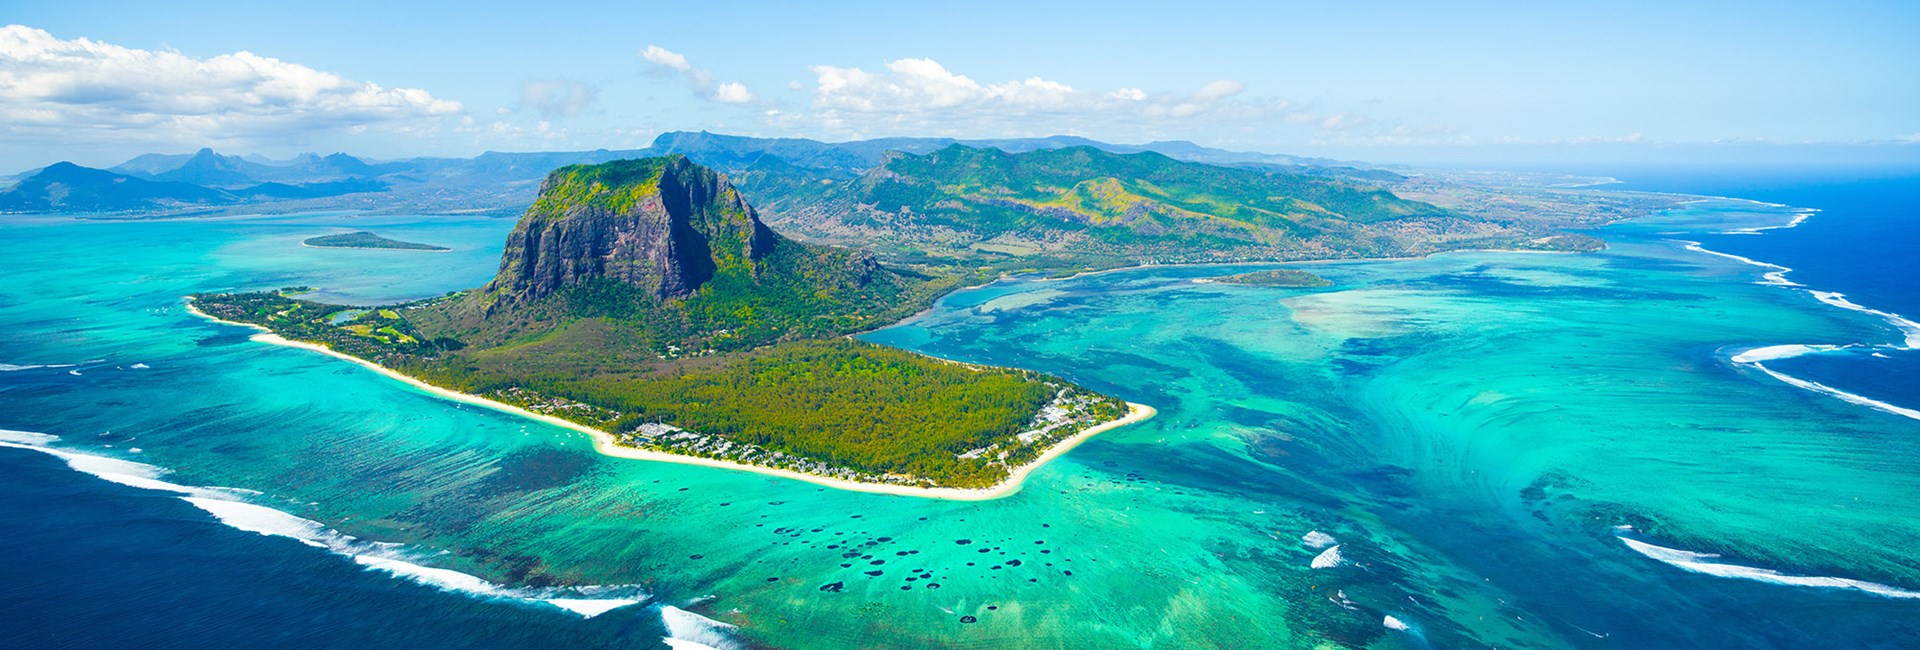 Aerial view of Mauritius island panorama with famous mountain and underwater waterfall 